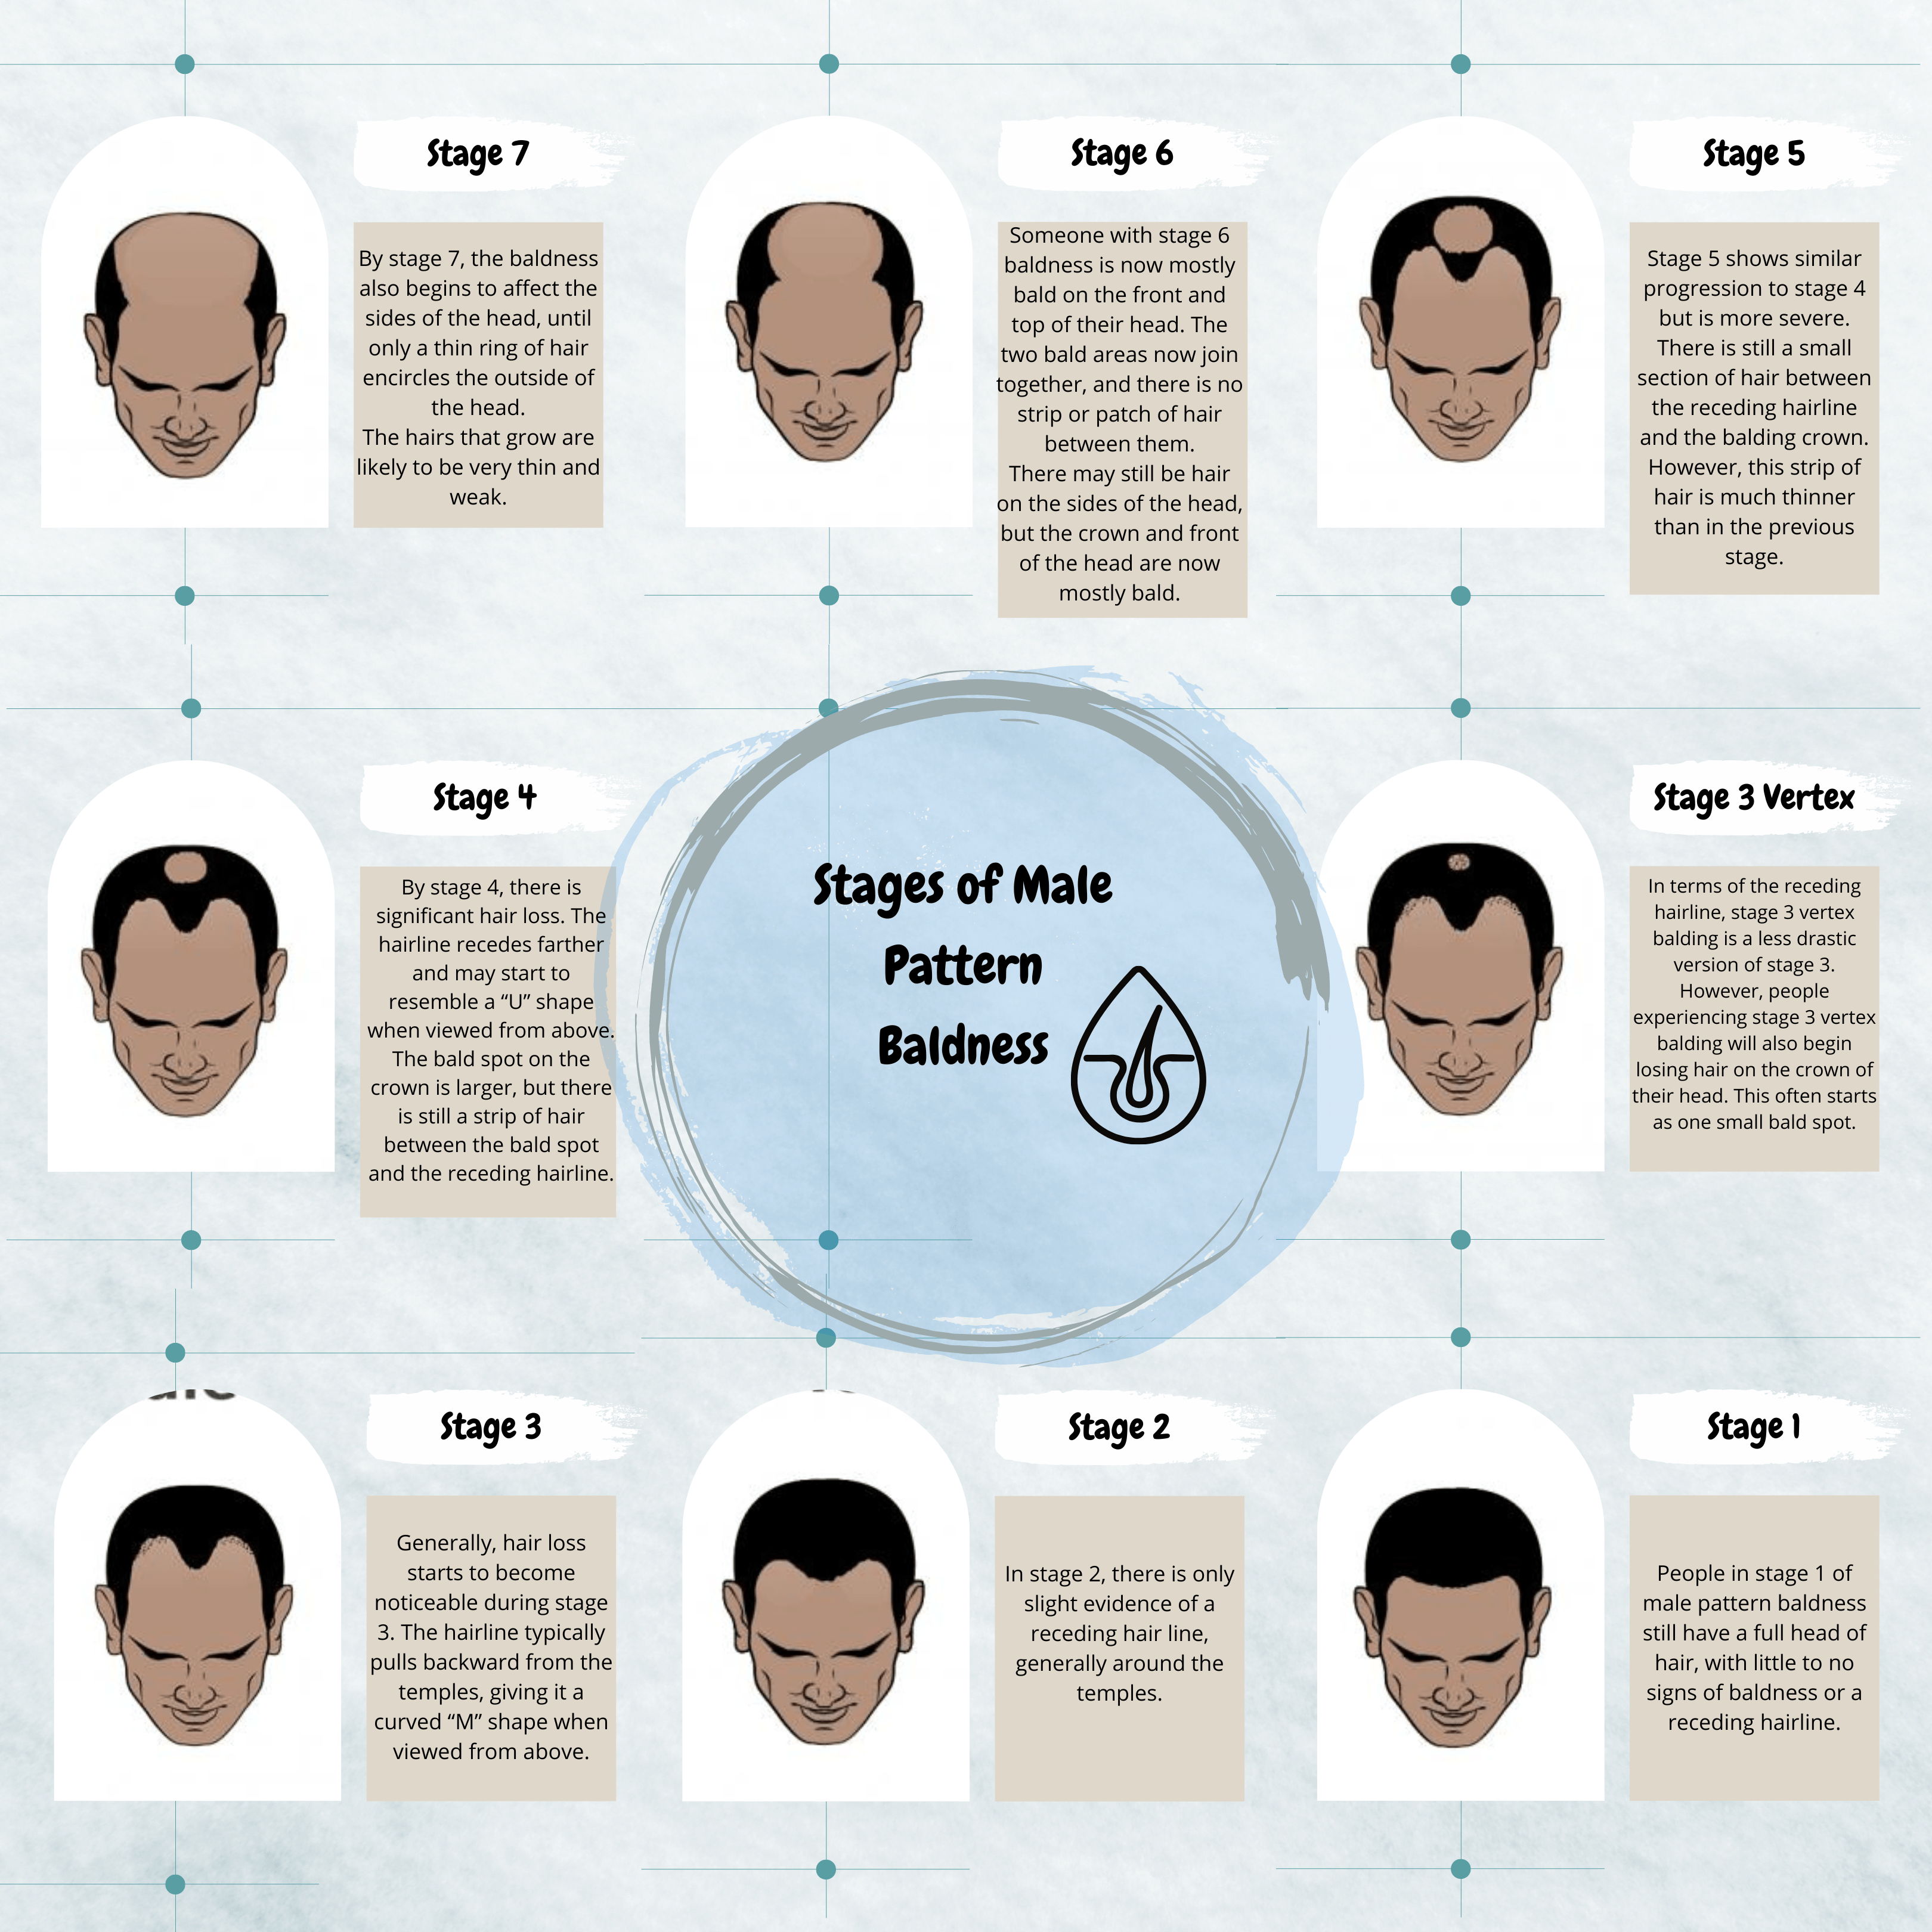 What are the Stages of Hair Loss? - The Norwood Scale